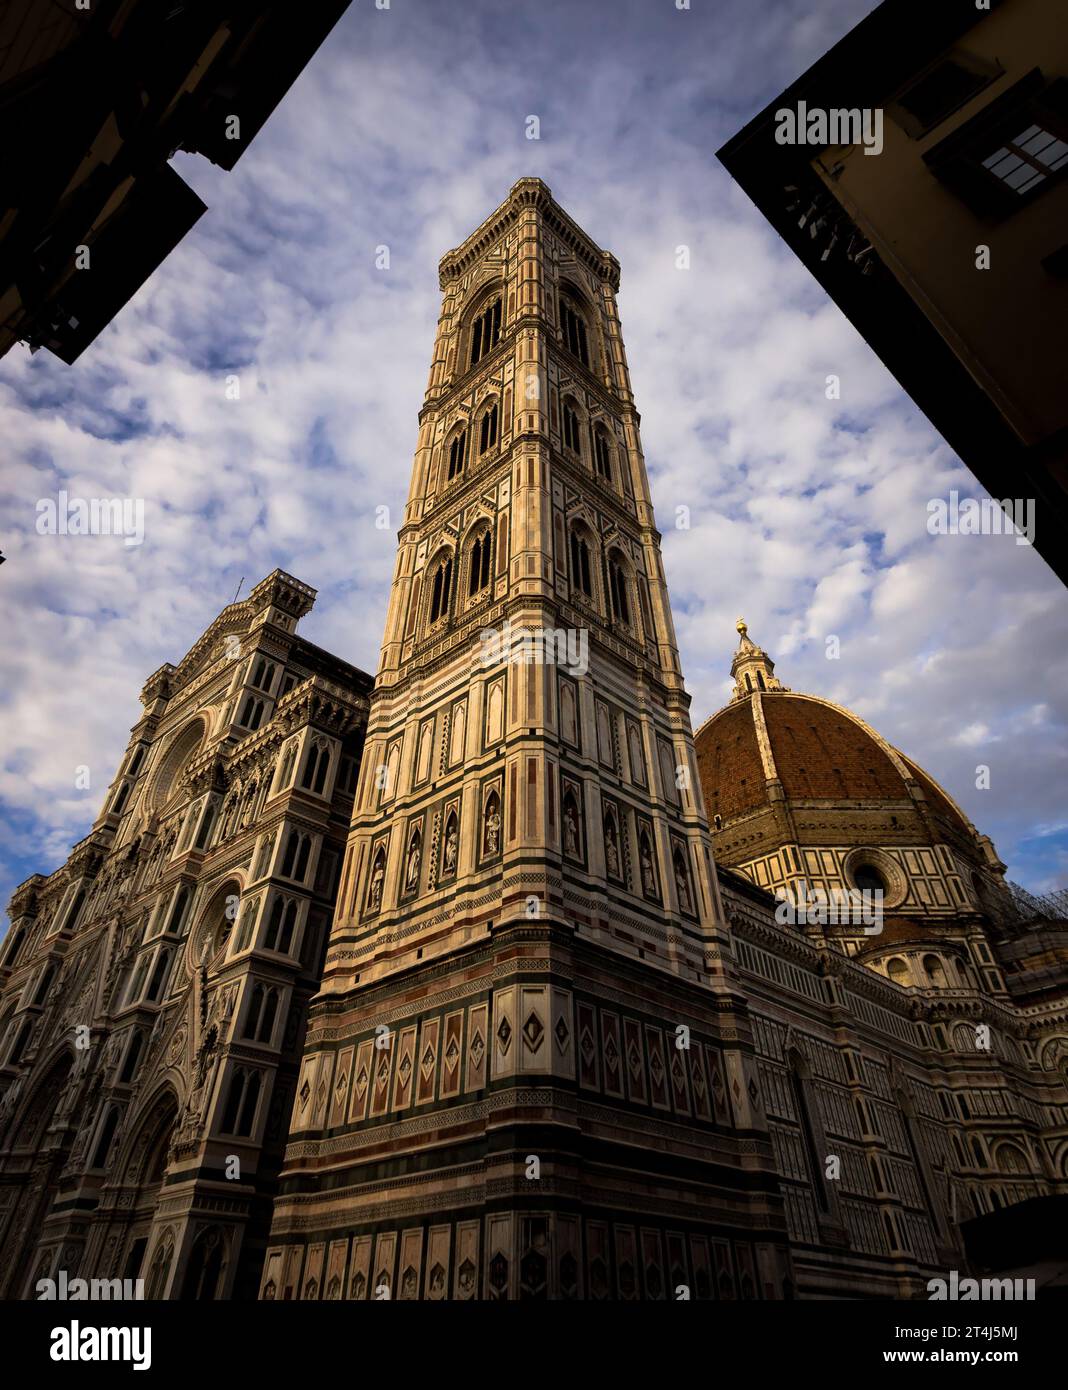 A vertical low angle shot of the historic Duomo building in Florence, Italy Stock Photo